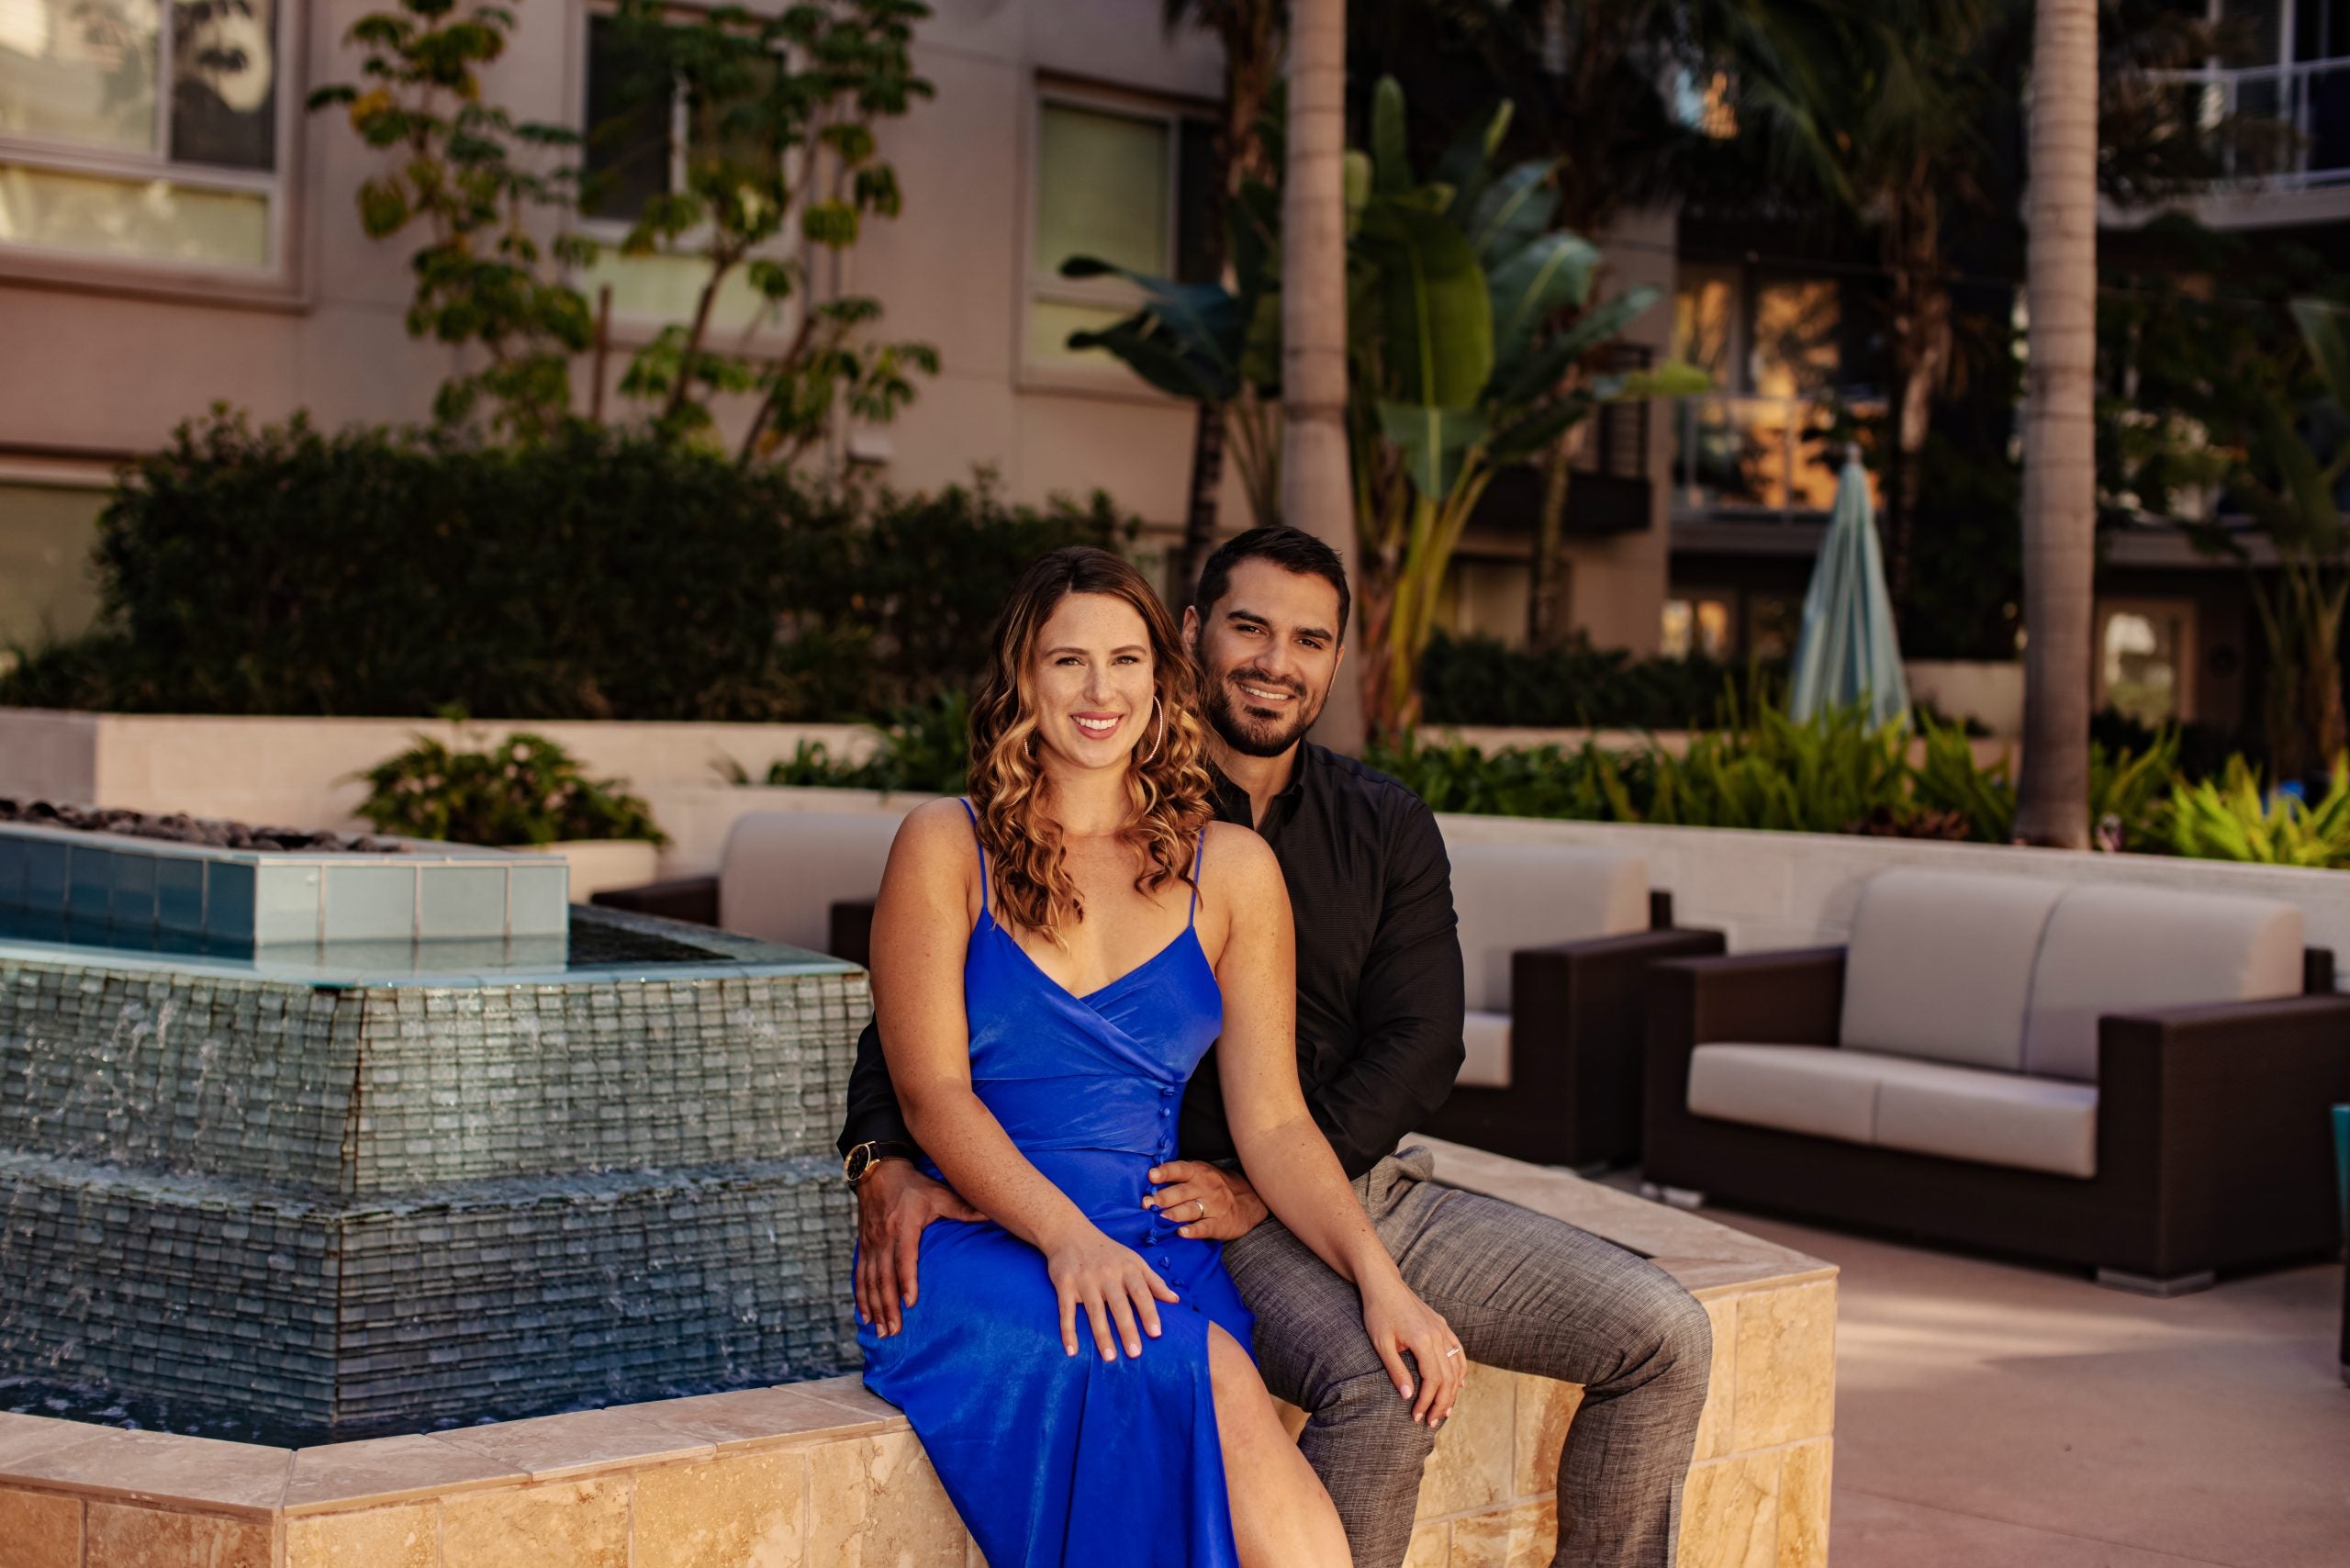 Lindy, in a blue dress, sitting in front of Miguel in promo shot for 'Married at First Sight' Season 15